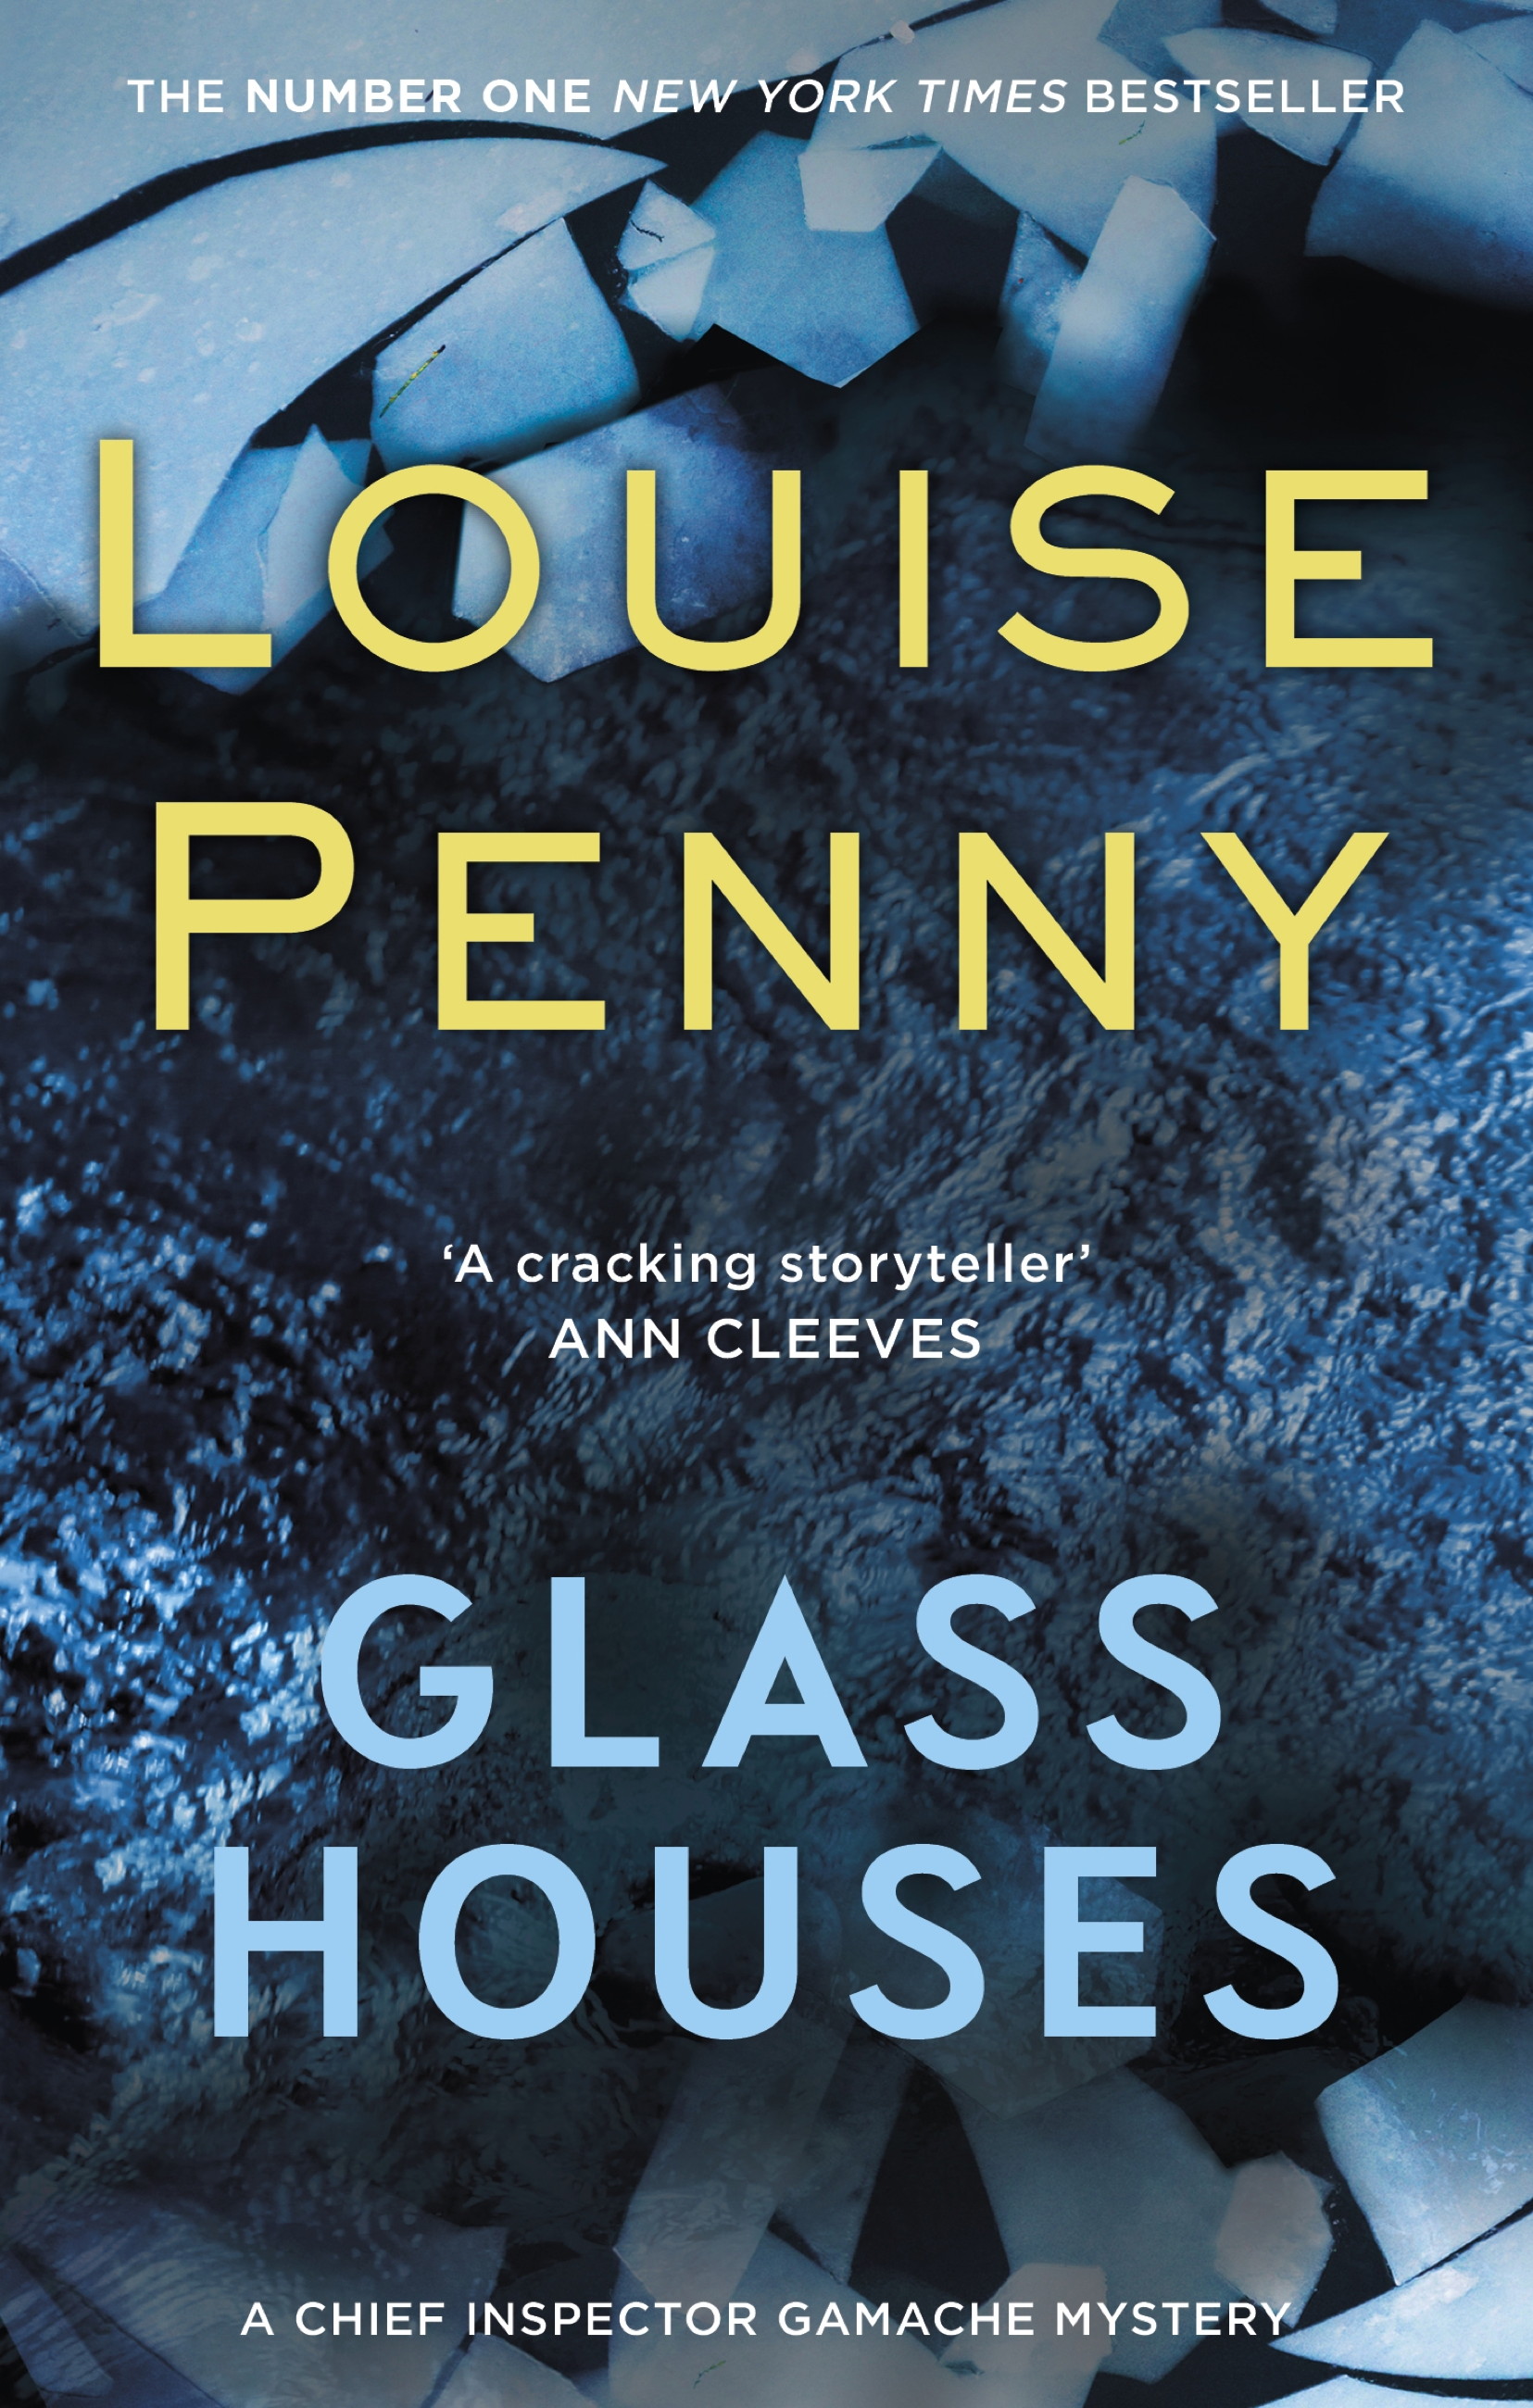 Glass Houses eBook by Louise Penny - EPUB Book